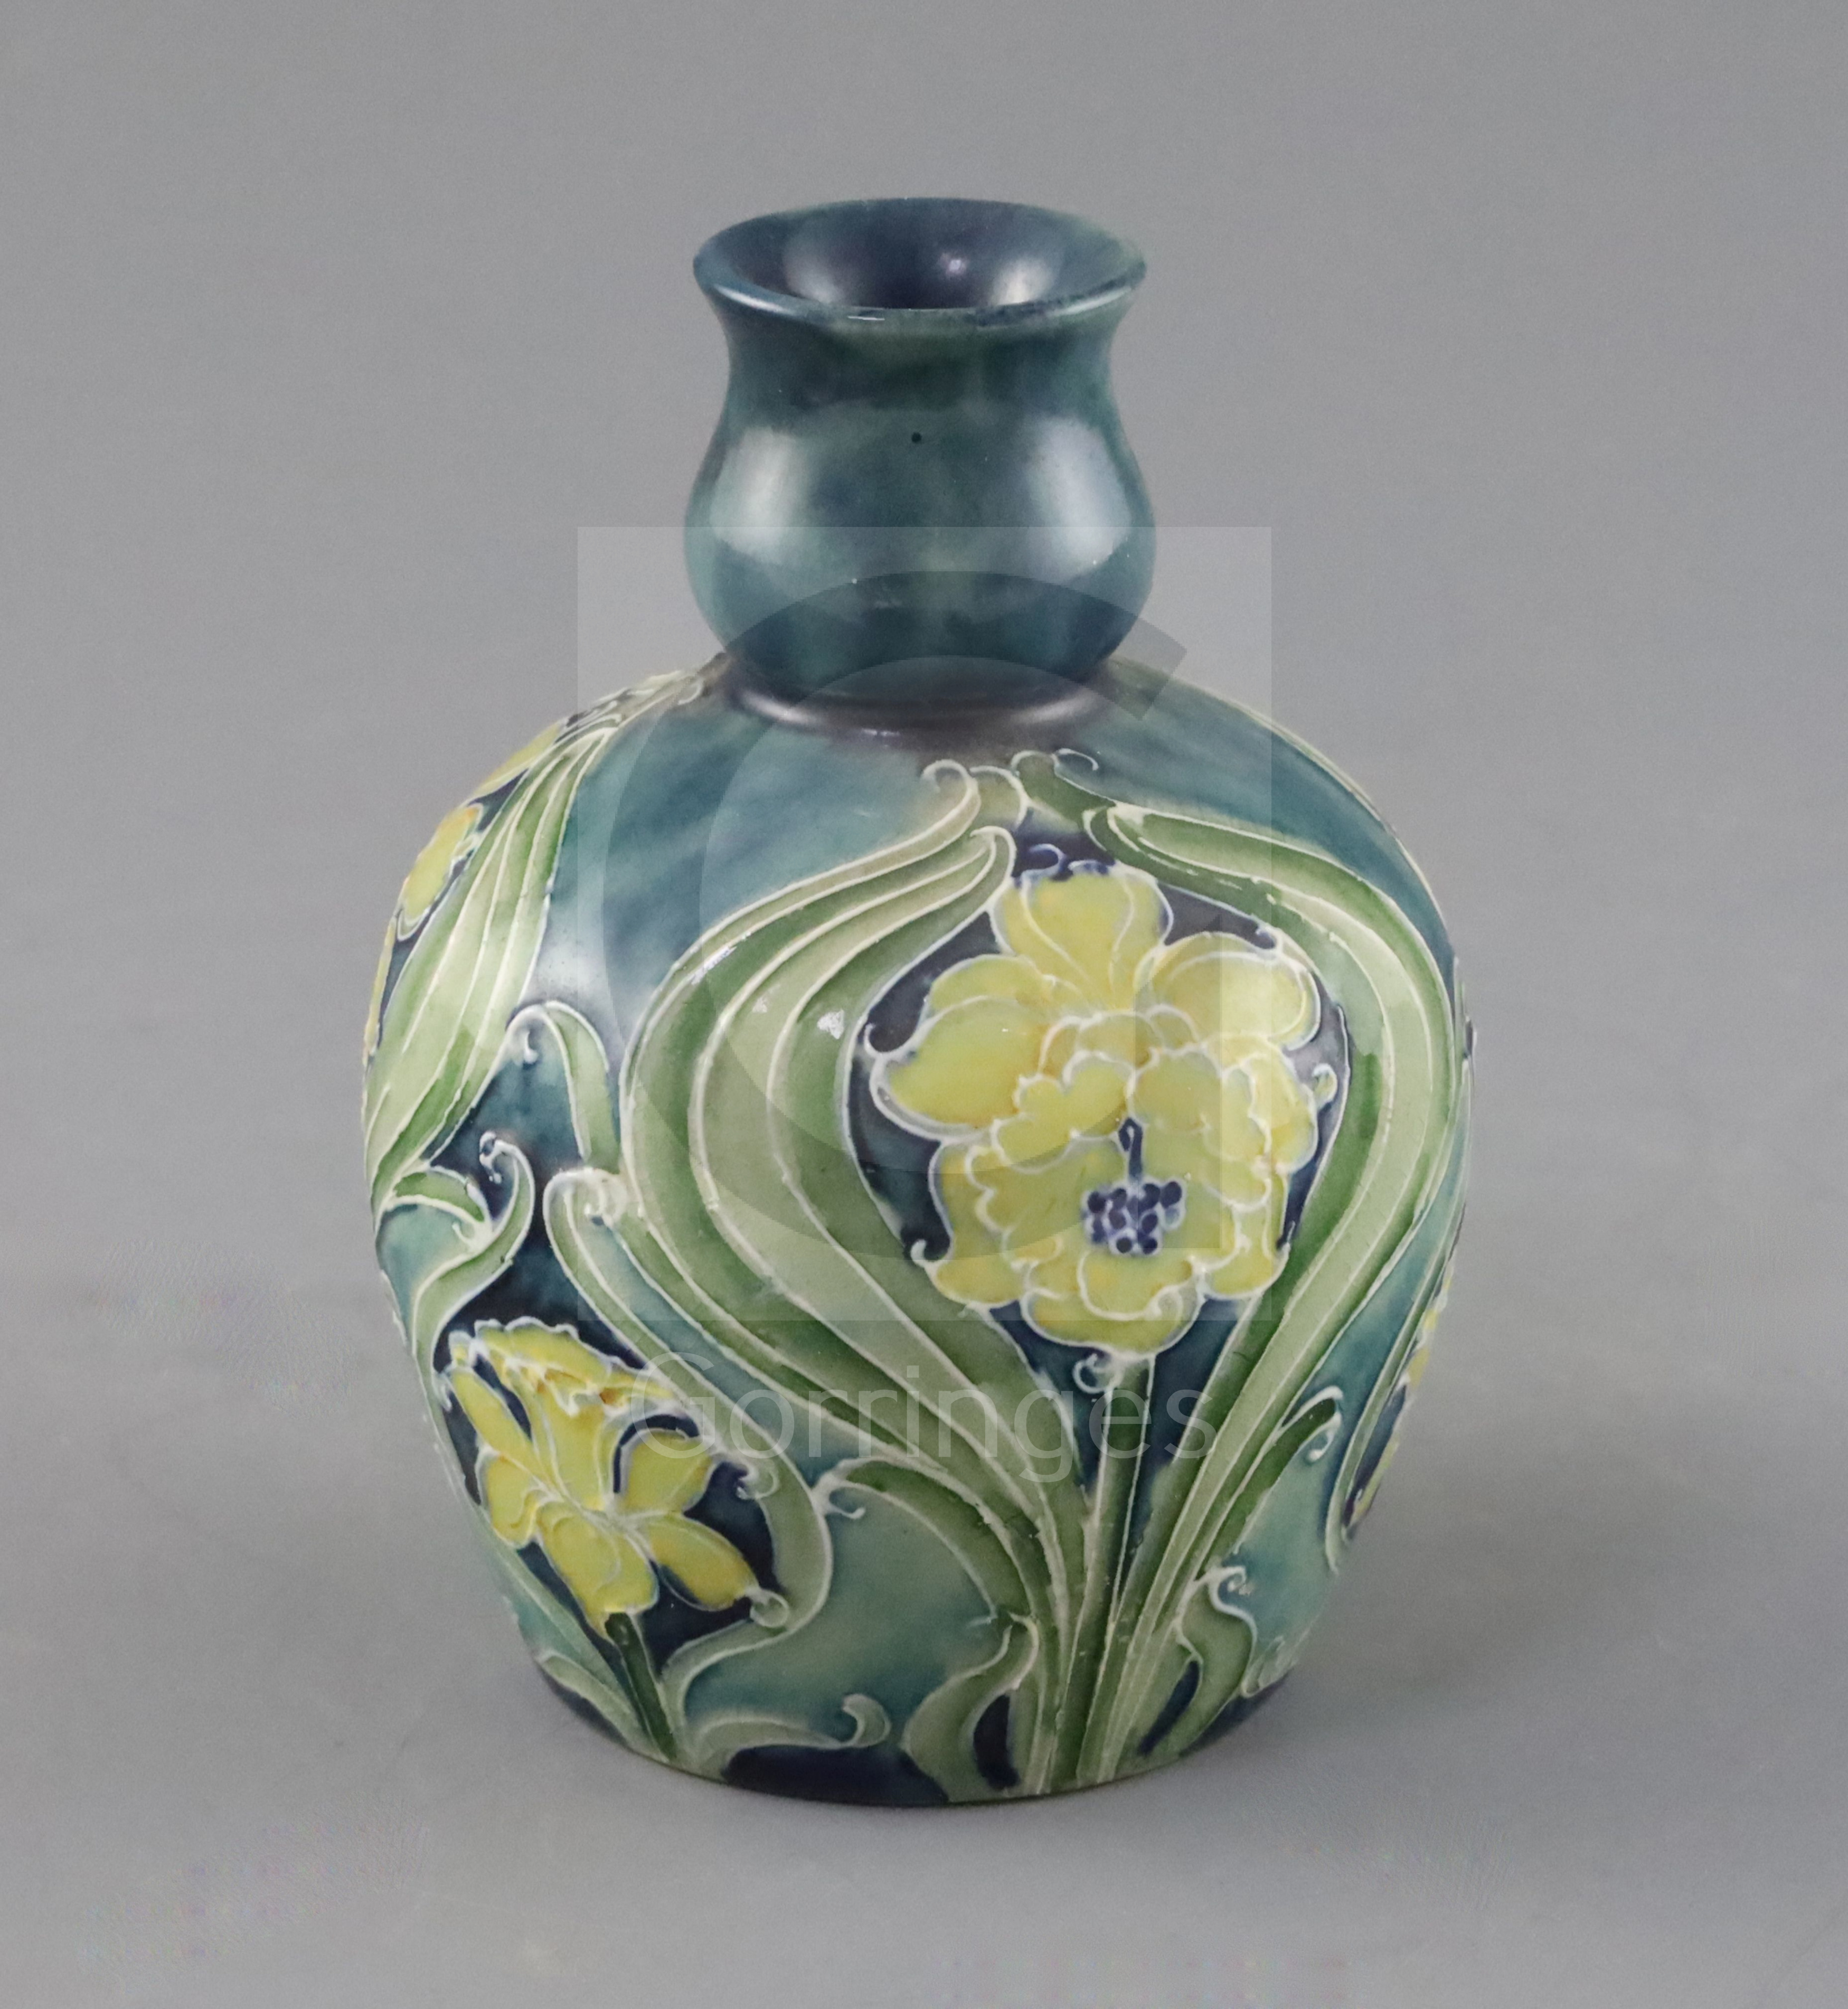 A Moorcroft Florian ware small vase, c.1902-5, decorated predominantly in green, blue and yellow